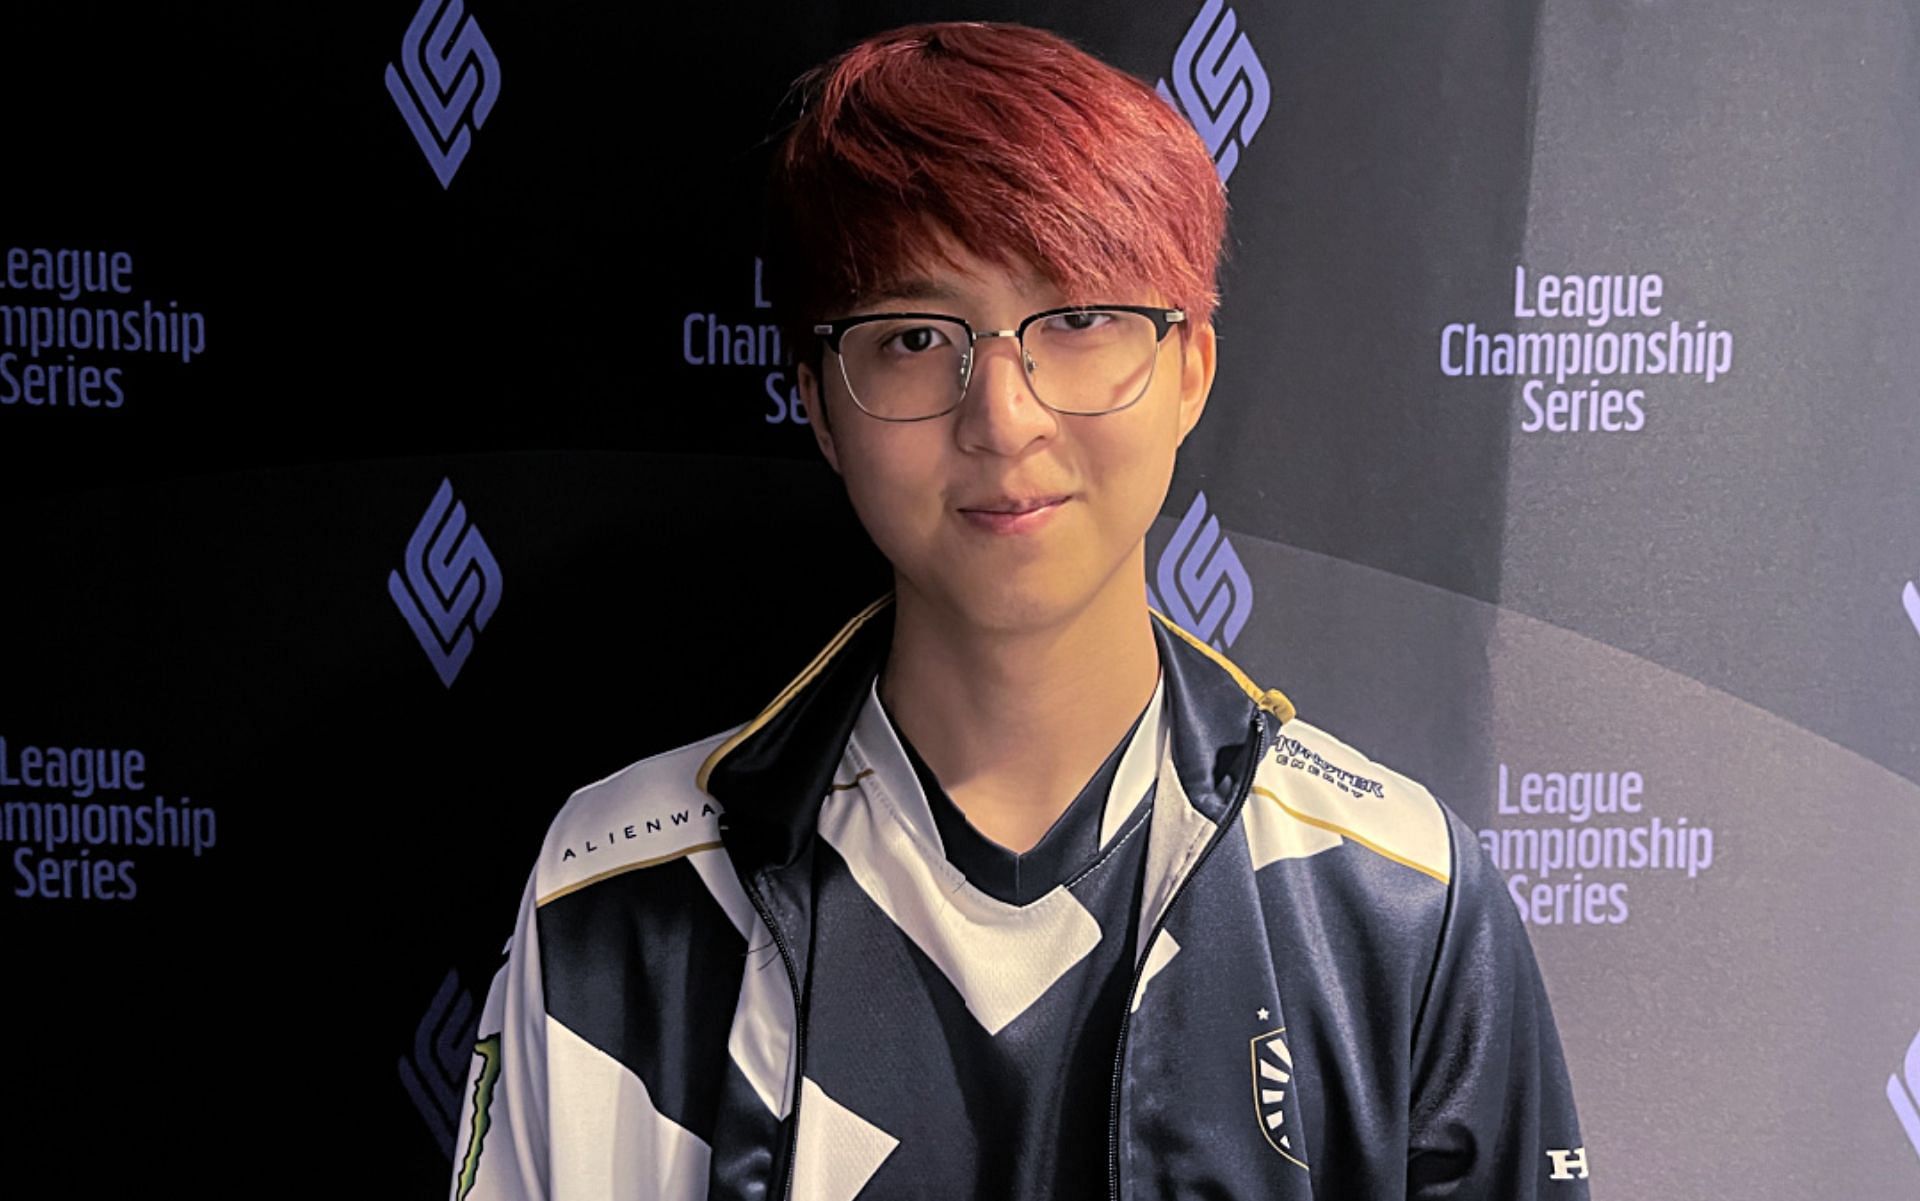 Hans Sama leaves Team Liquid after a disastrous year in the LCS (Image via Riot Games)